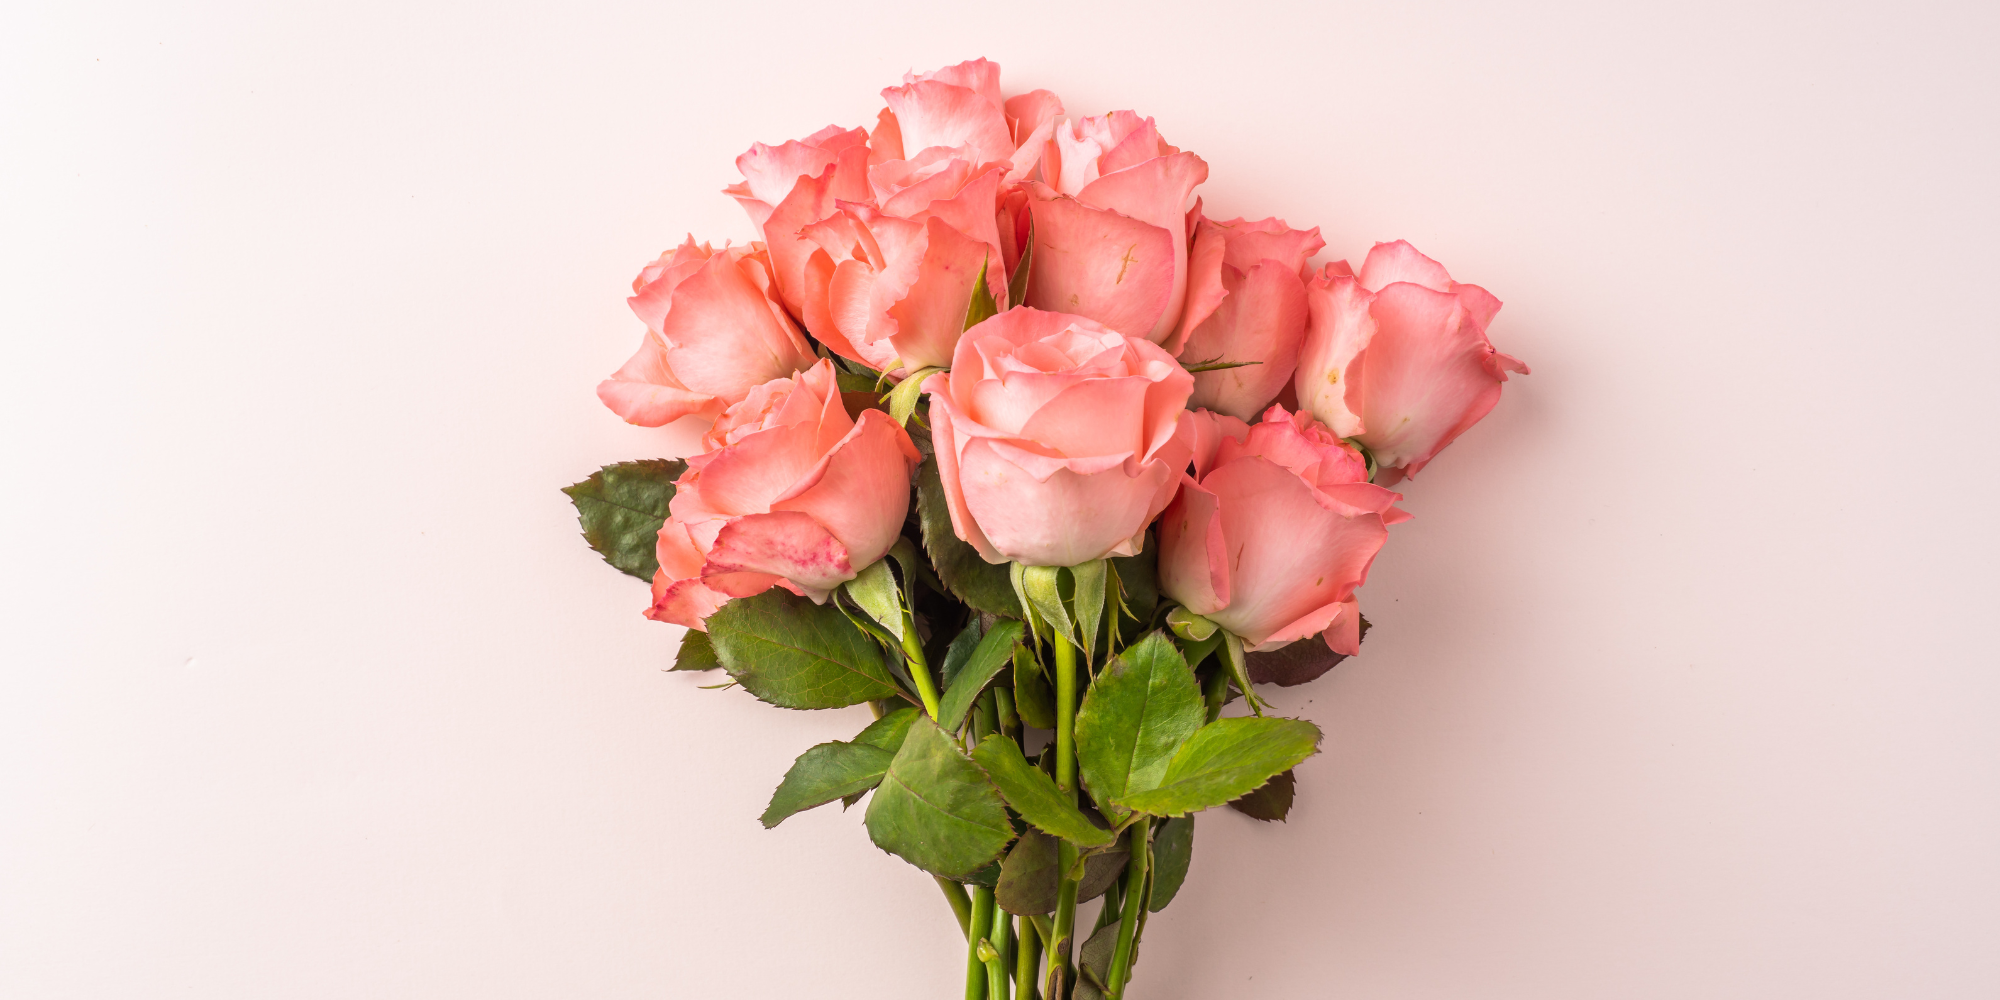 Decorate Your Home with Eternity Roses